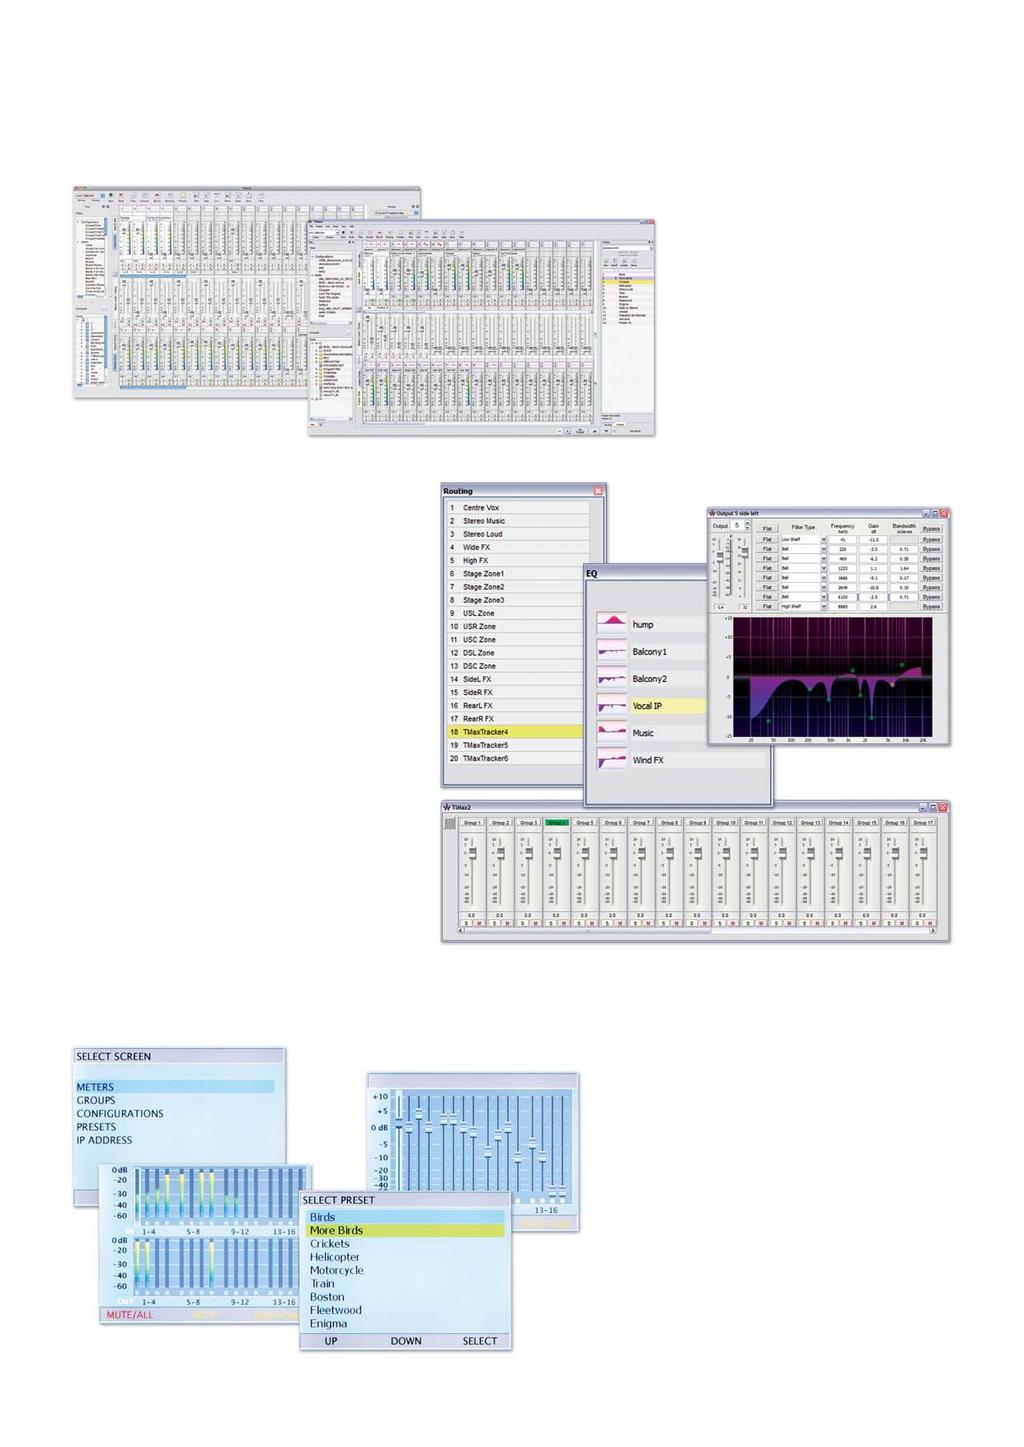 TASK-BASED PROGRAMMING AND CONTROL SOFTWARE A PC or Mac software suite allows the systems integrator or sound designer to assign all source and zone routing, level and EQ configurations to Presets